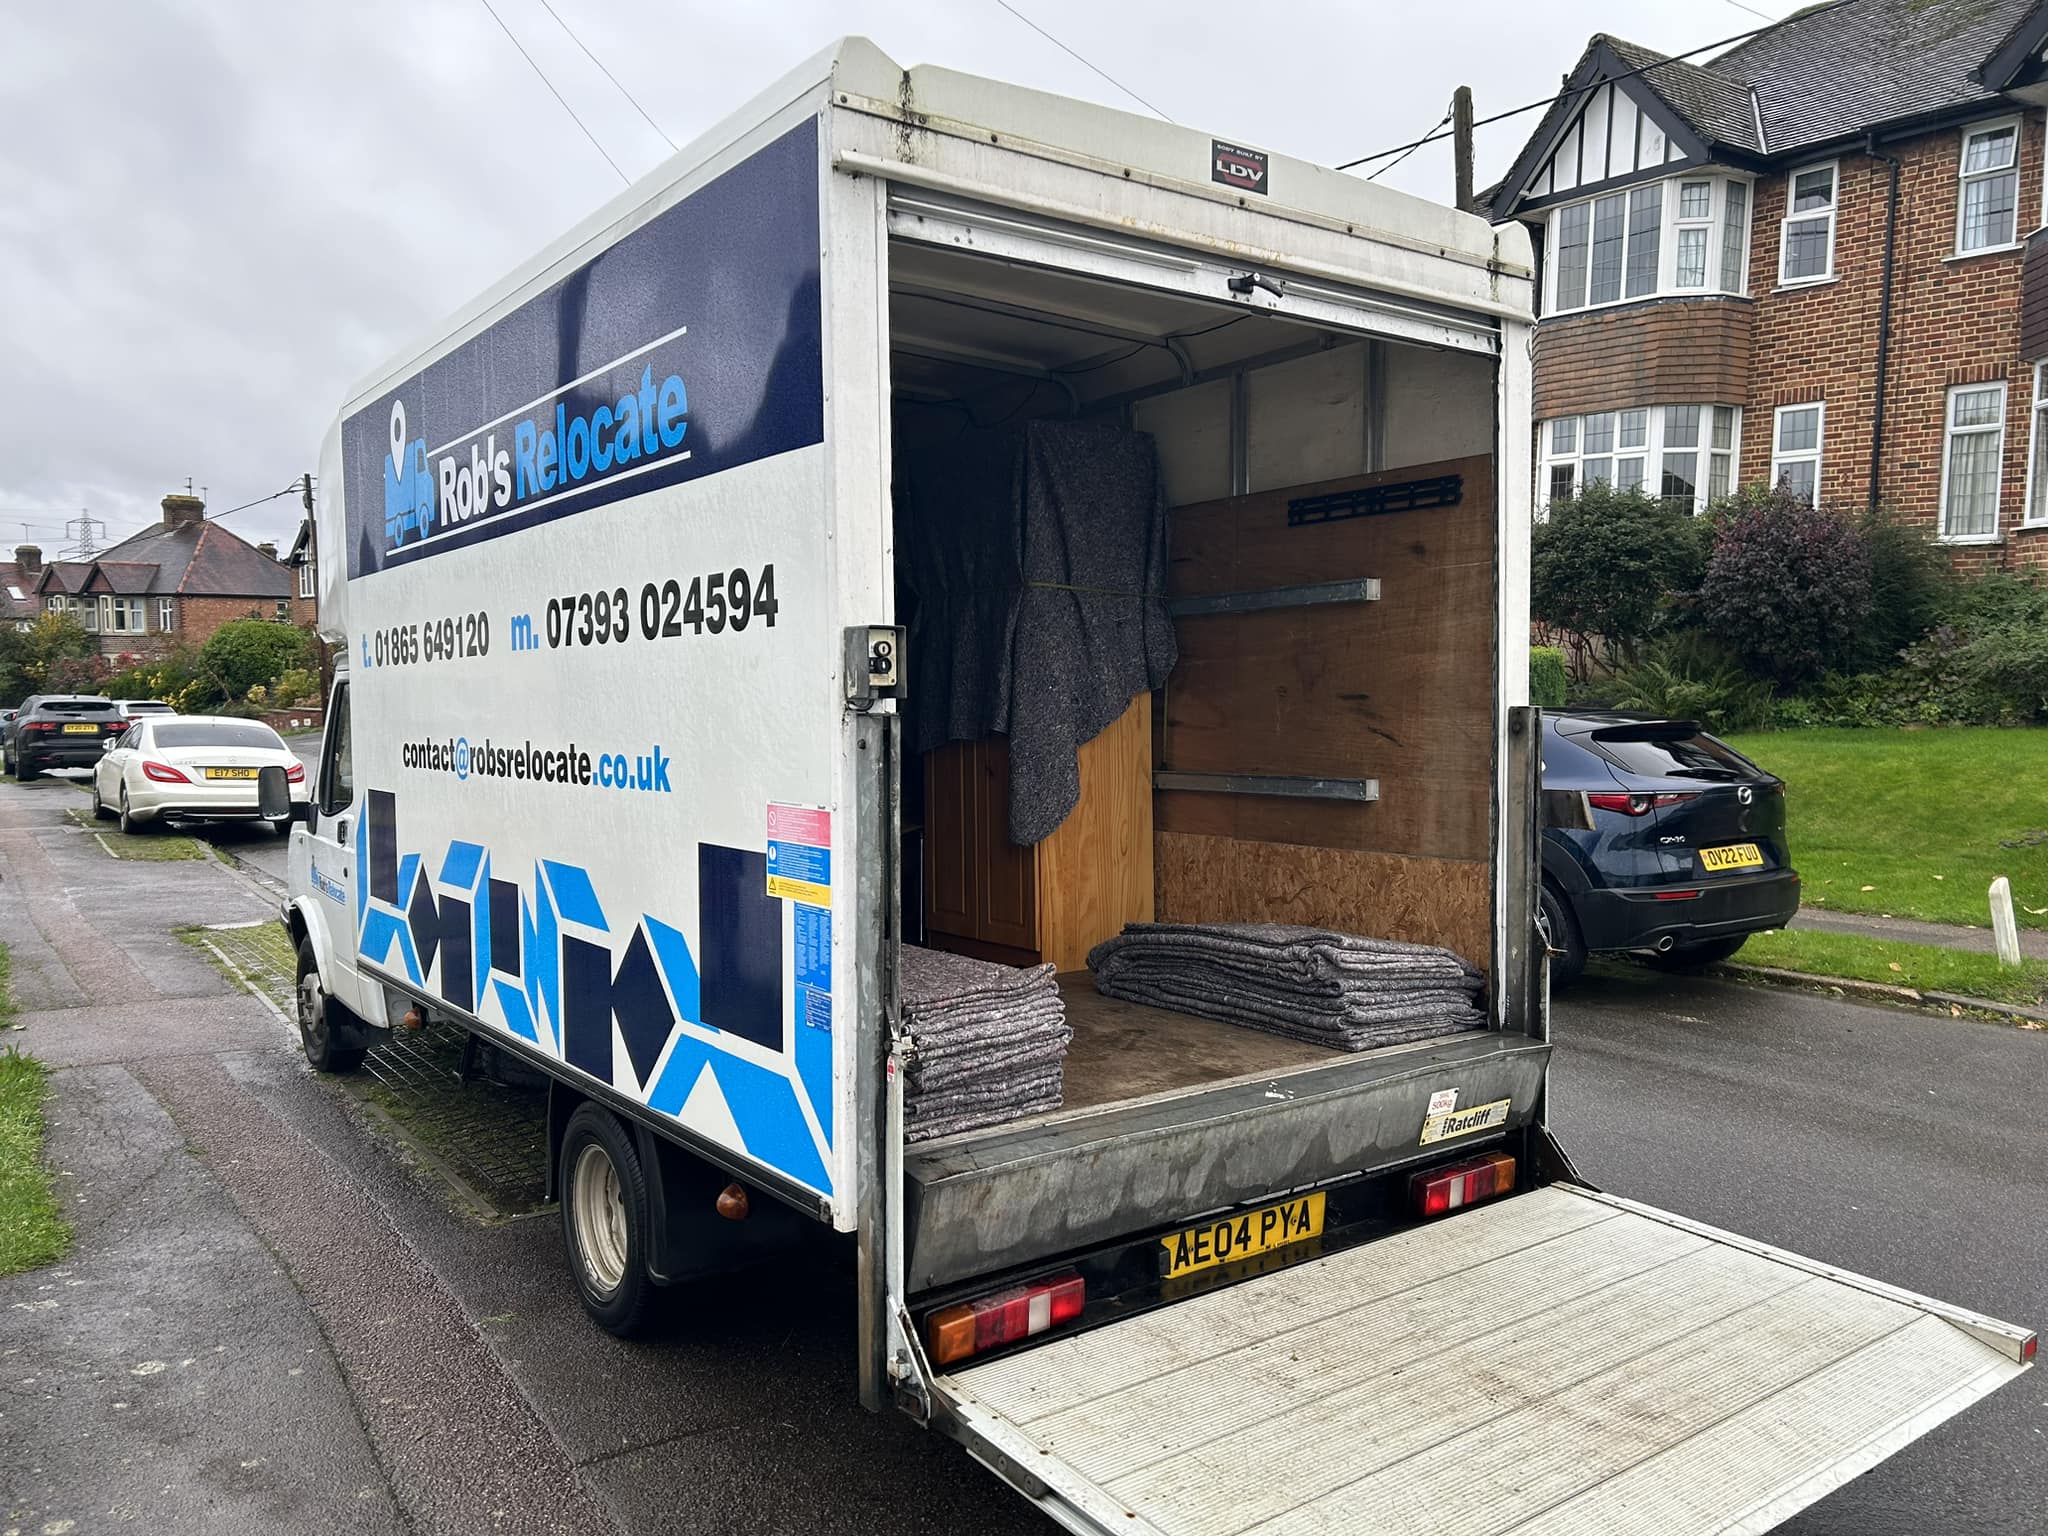 Rob's Relocate Professional Moving Service Van